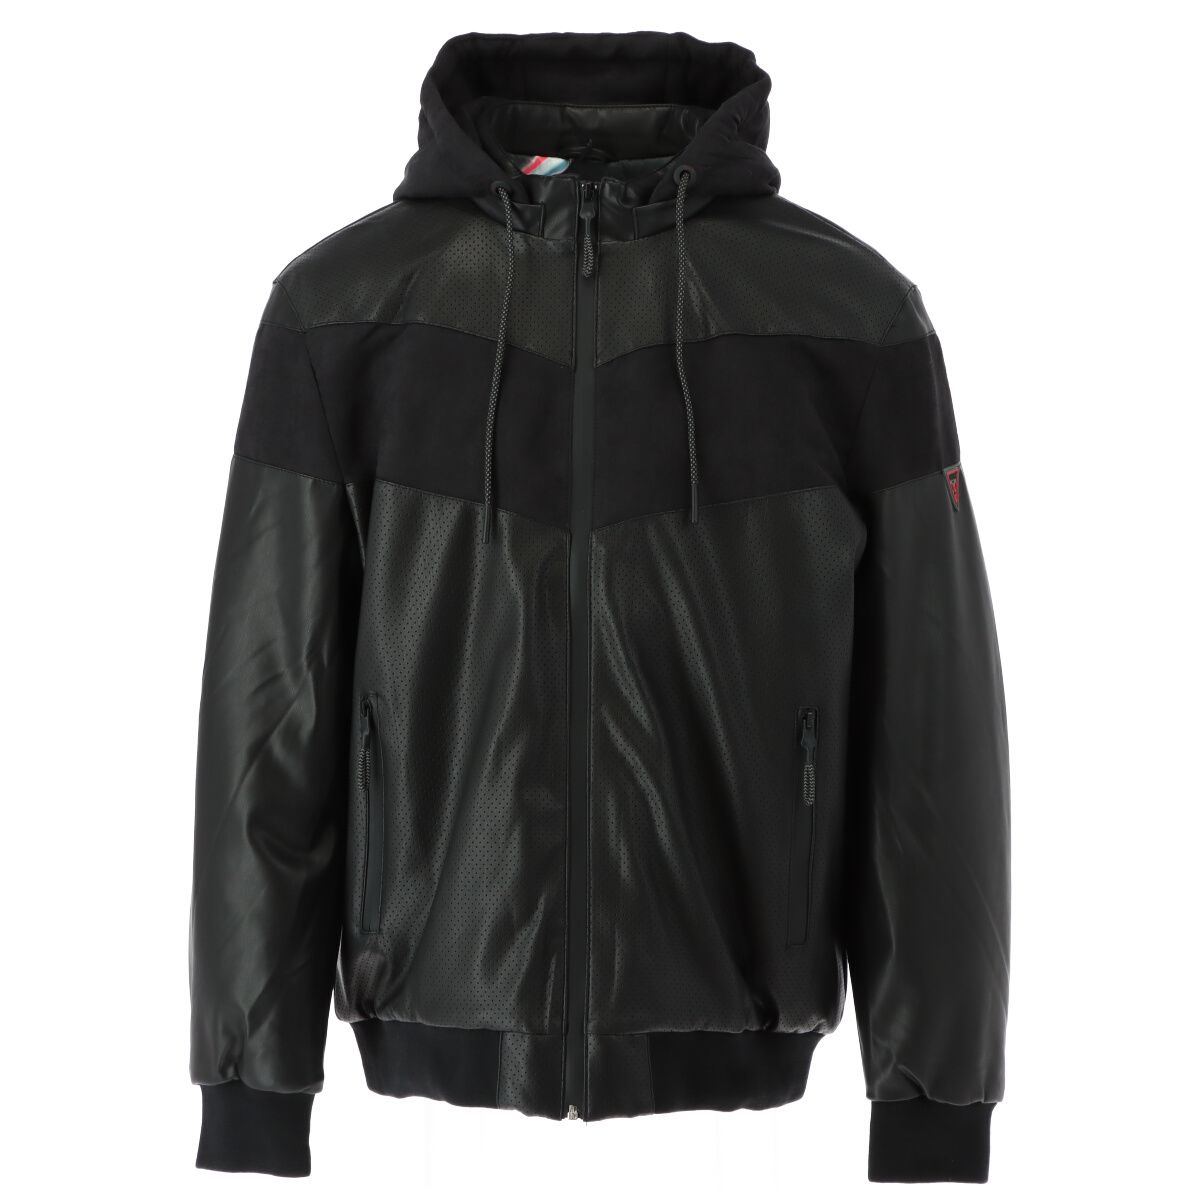 Brand: Guess
Gender: Men
Type: Jackets
Season: Fall/Winter

PRODUCT DETAIL
• Color: black
• Fastening: with zip
• Sleeves: long
• Collar: hood
• Pockets: zip pockets

COMPOSITION AND MATERIAL
• Composition: -2% elastane -98% polyester